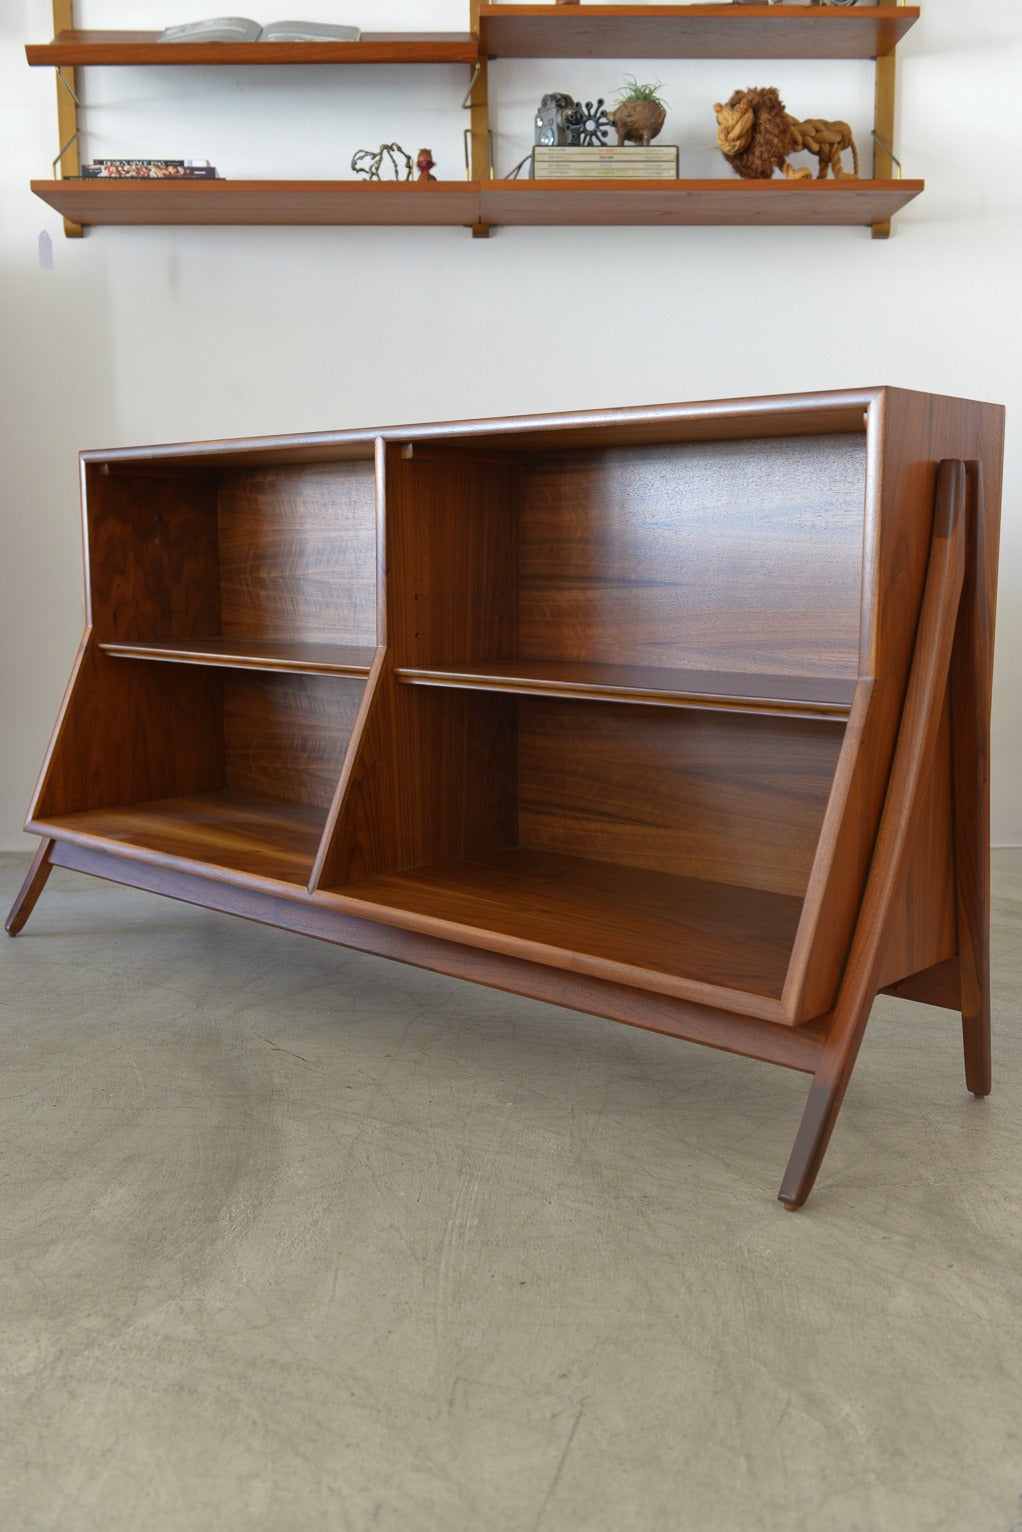 Rare walnut bookcase by Kipp Stewart and Stewart MacDougall for Drexel's Declaration line.  Professionally restored to showroom perfect condition, this rare piece is perfect for just about anywhere in your home.

Finished on both sides, it can